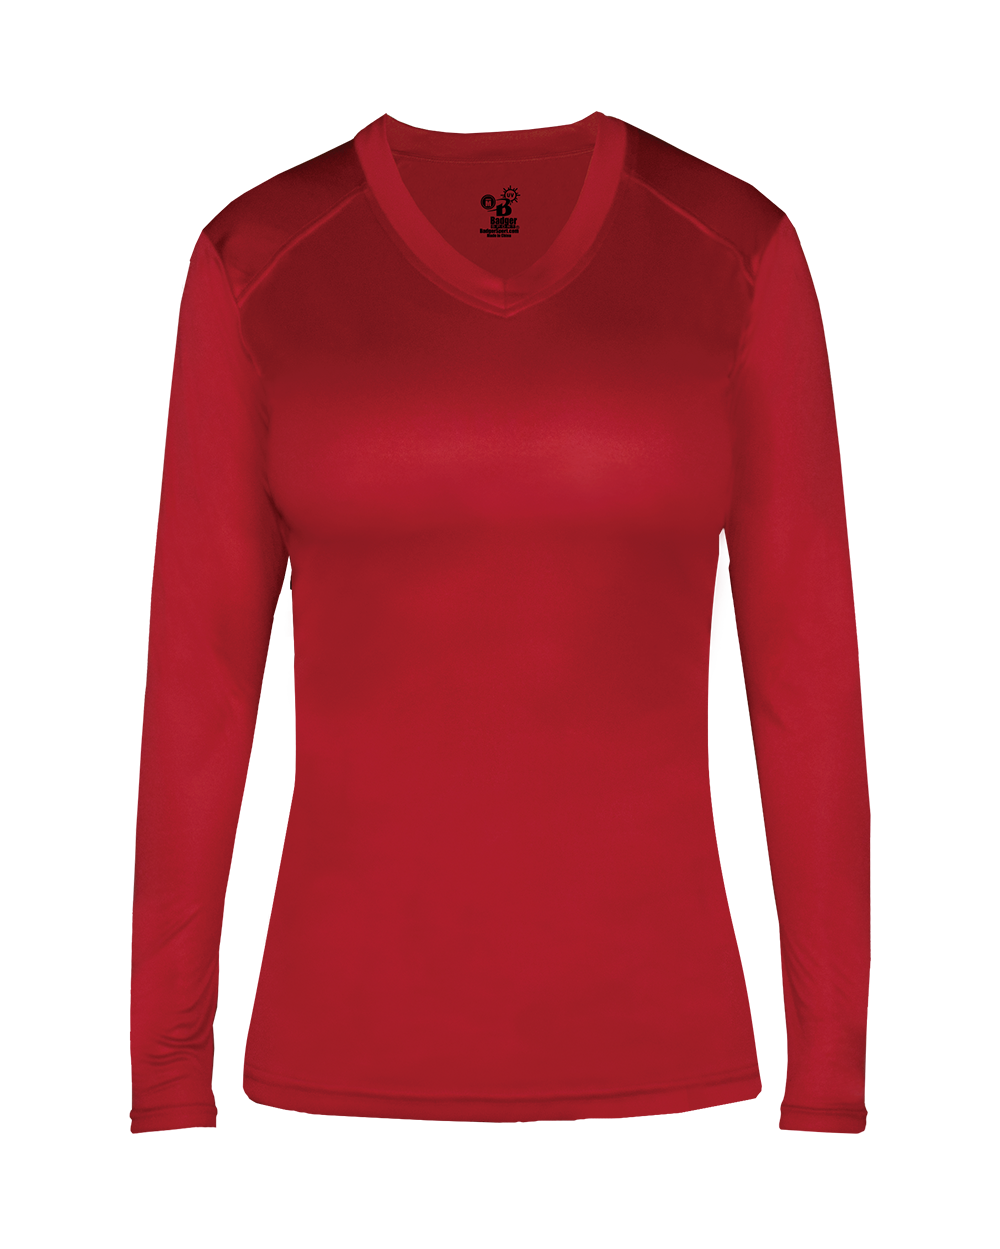 Ultimate Ladies' Fitted L/S V-